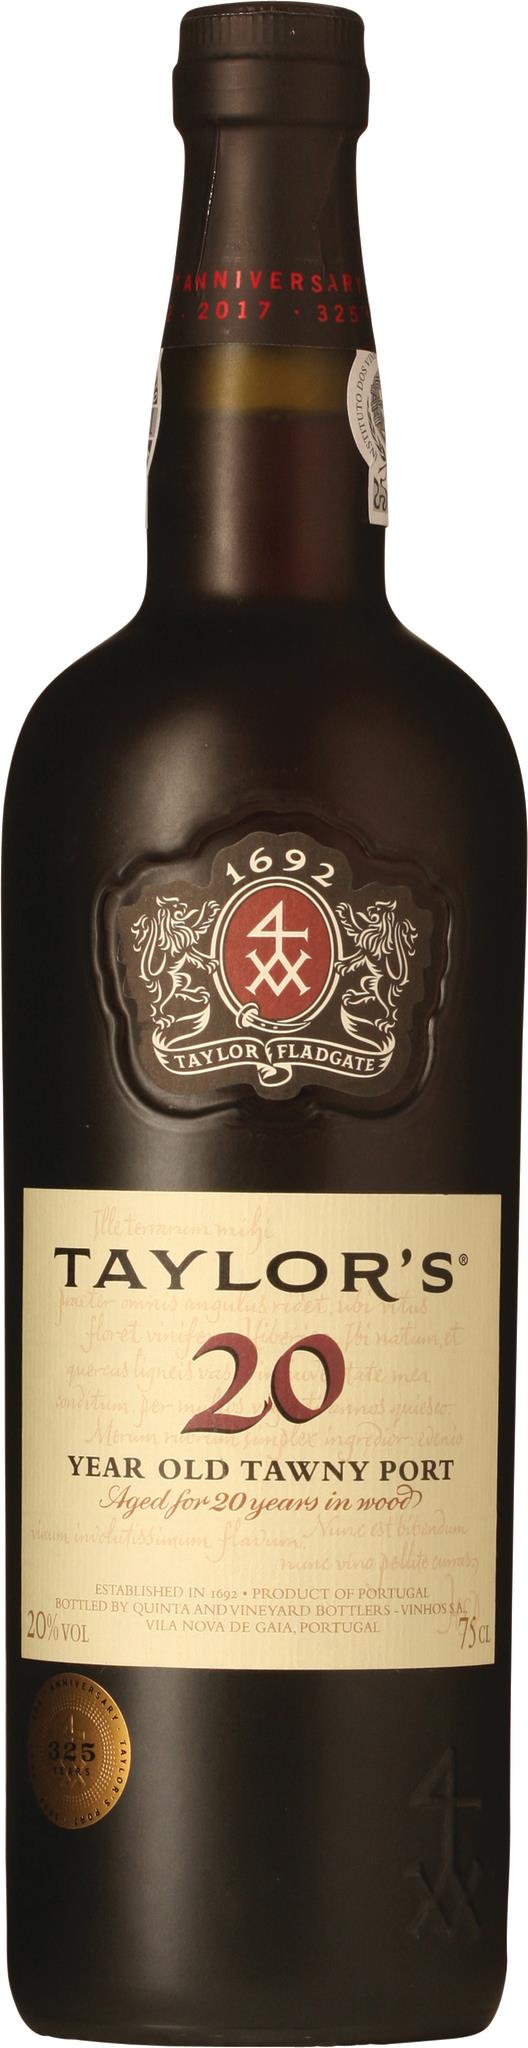 Taylor's 20 Year Old Tawny Port - 20% 75cl